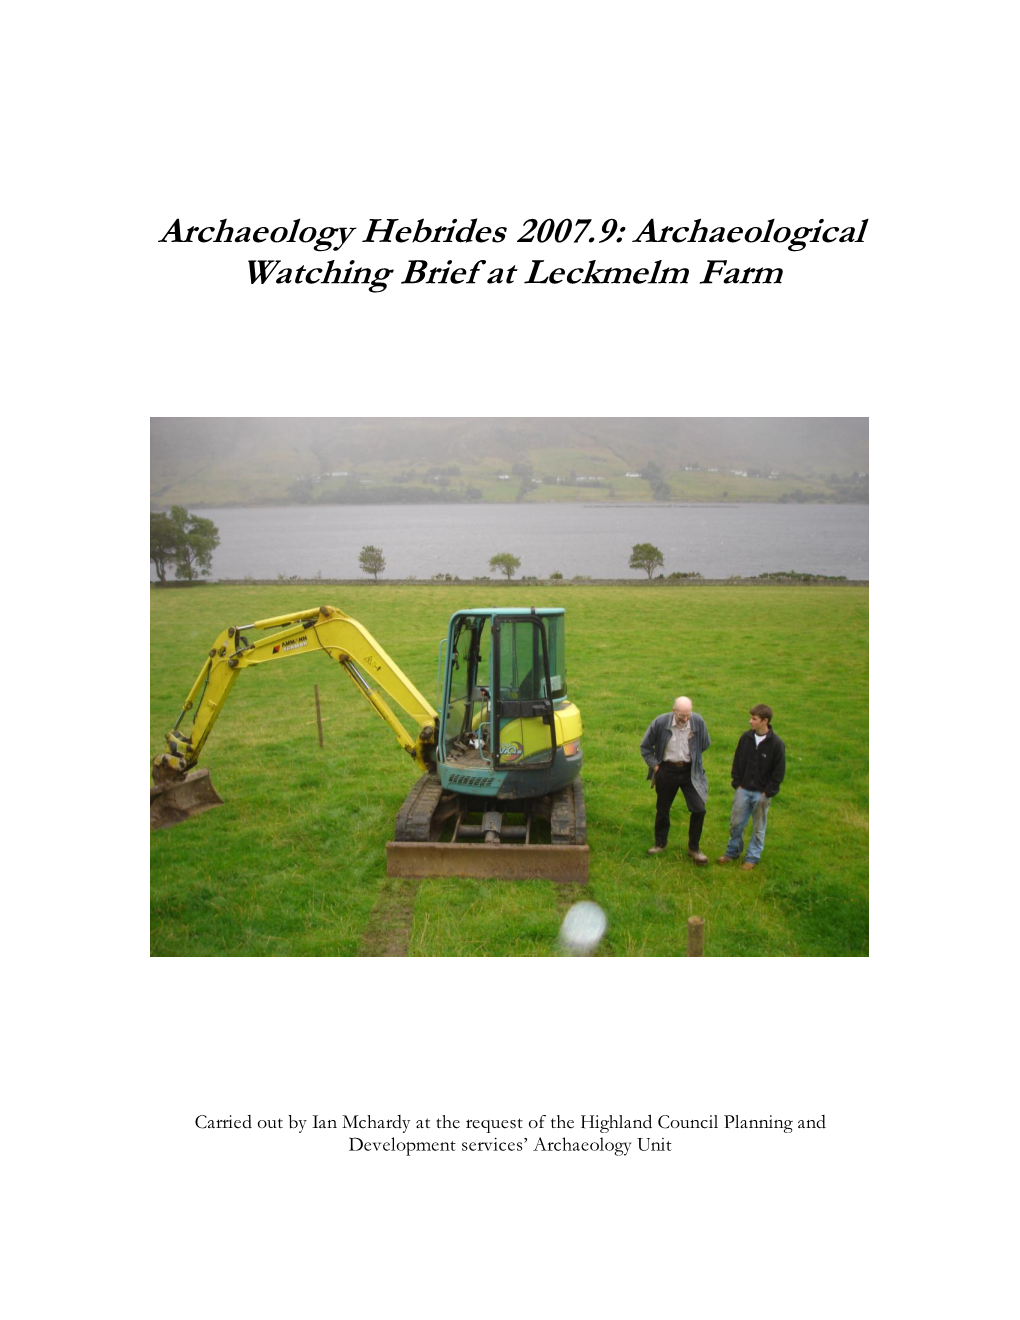 Archaeology Hebrides 2007.9: Archaeological Watching Brief at Leckmelm Farm